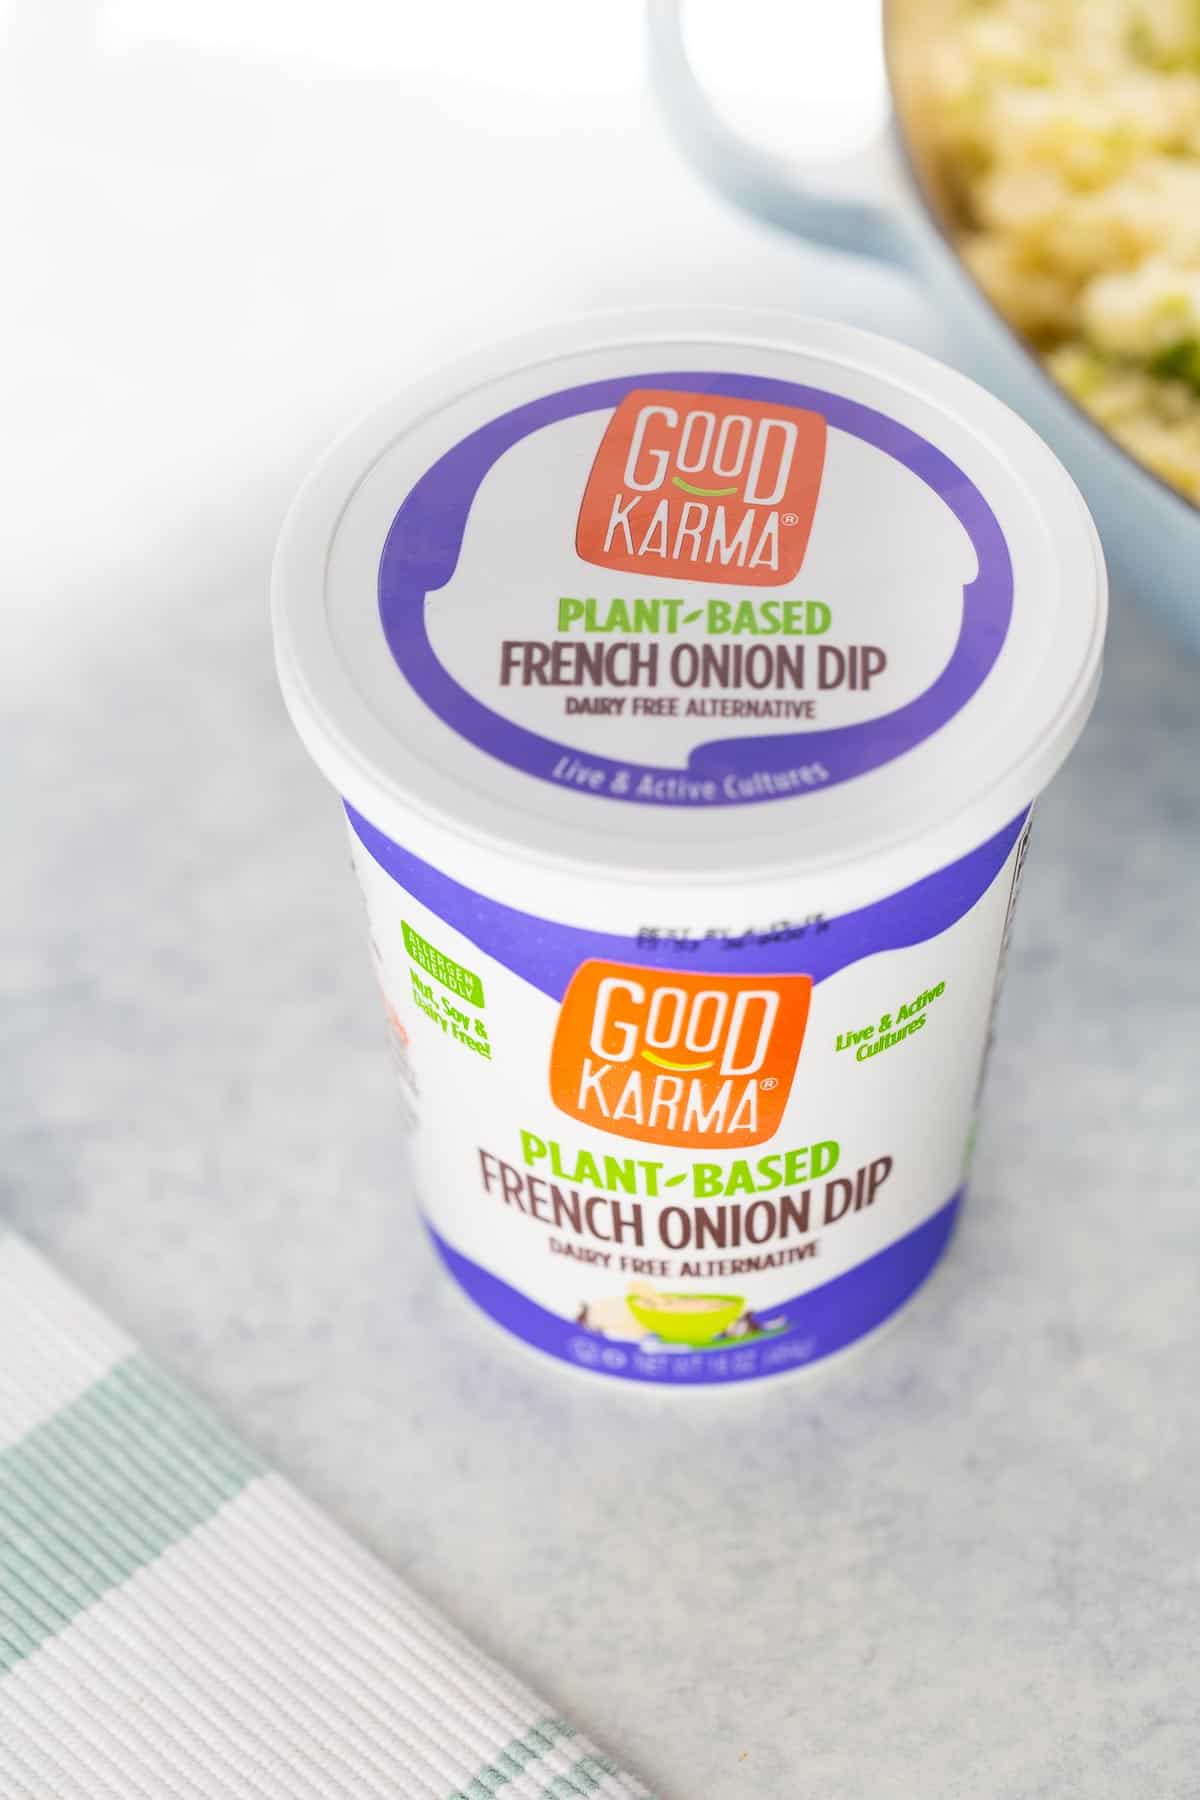 Shot of container of Good Karma Foods French Onion Dip